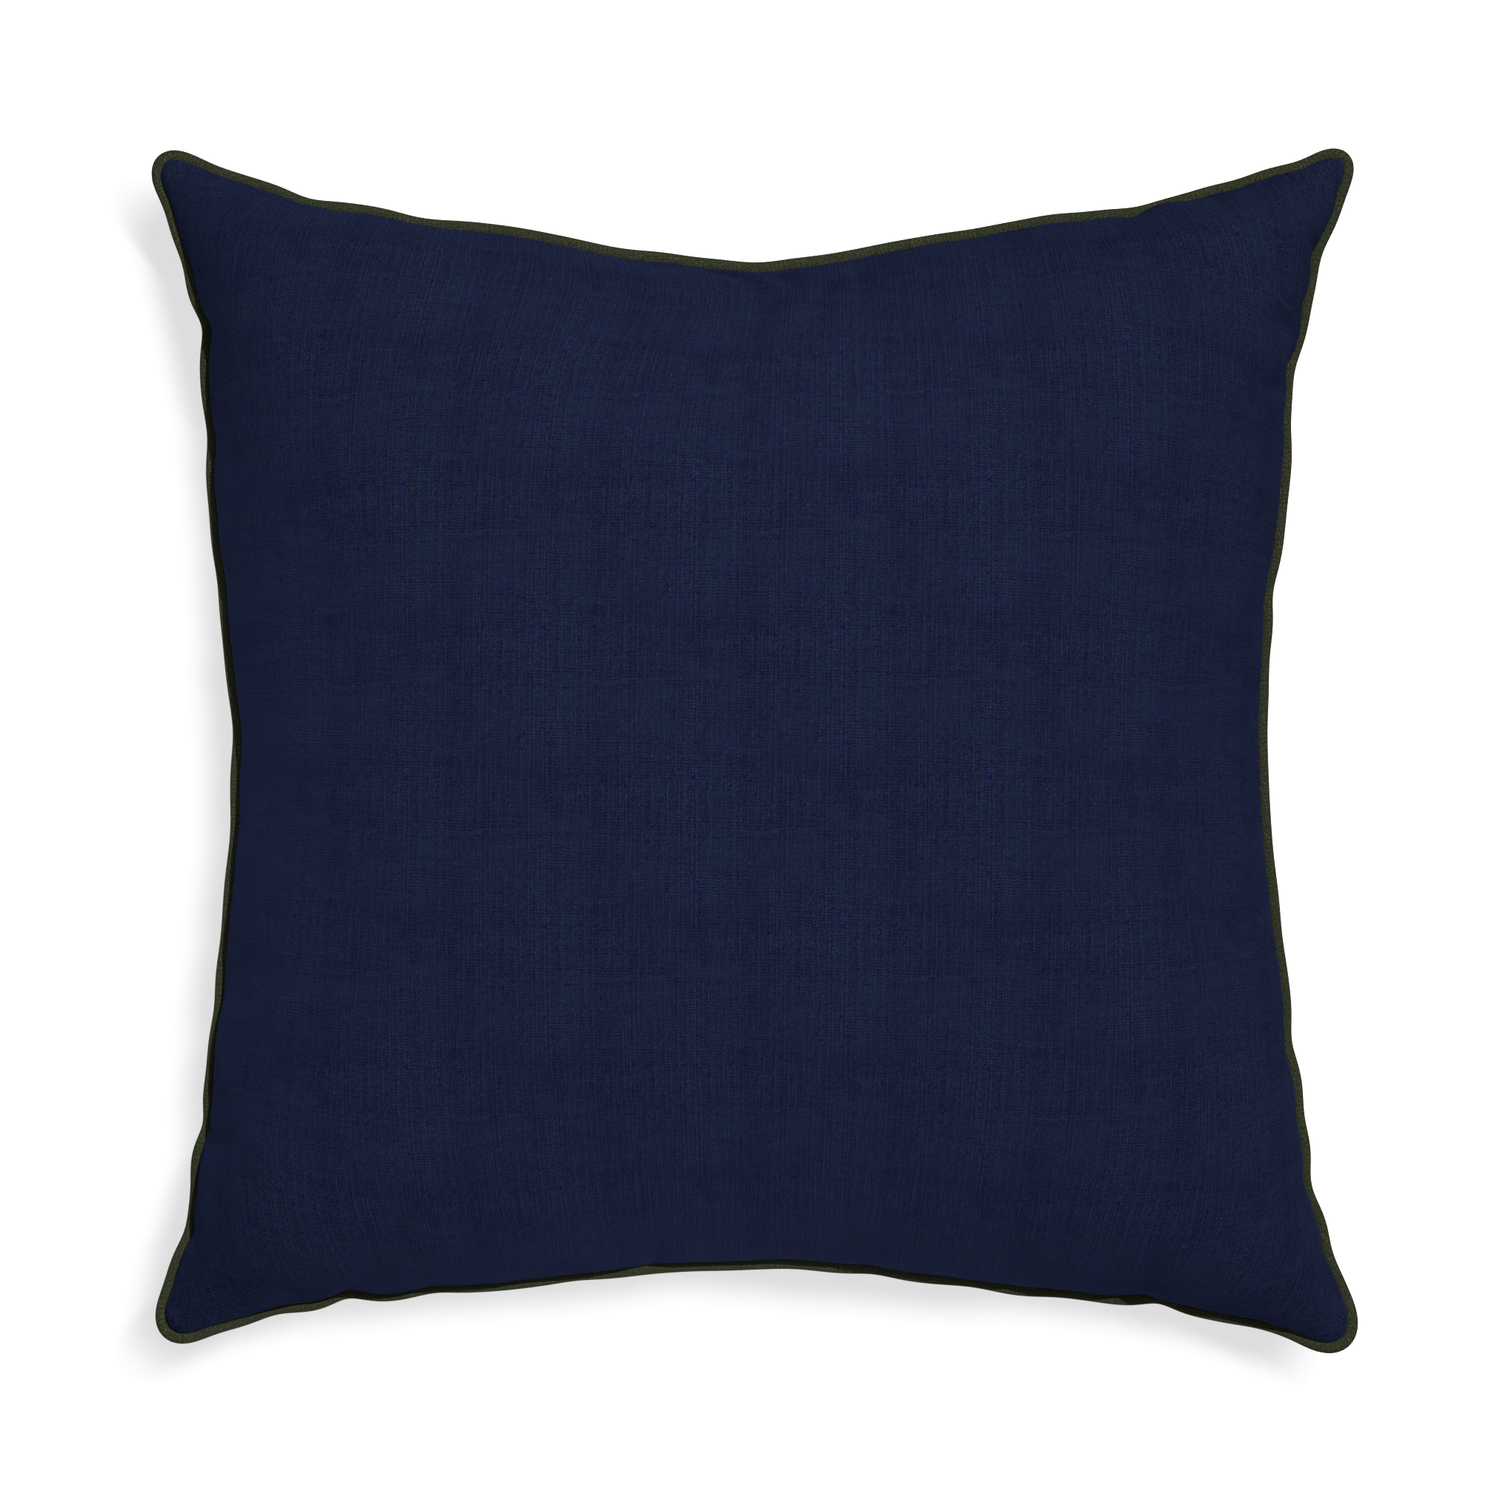 Euro-sham midnight custom navy bluepillow with f piping on white background